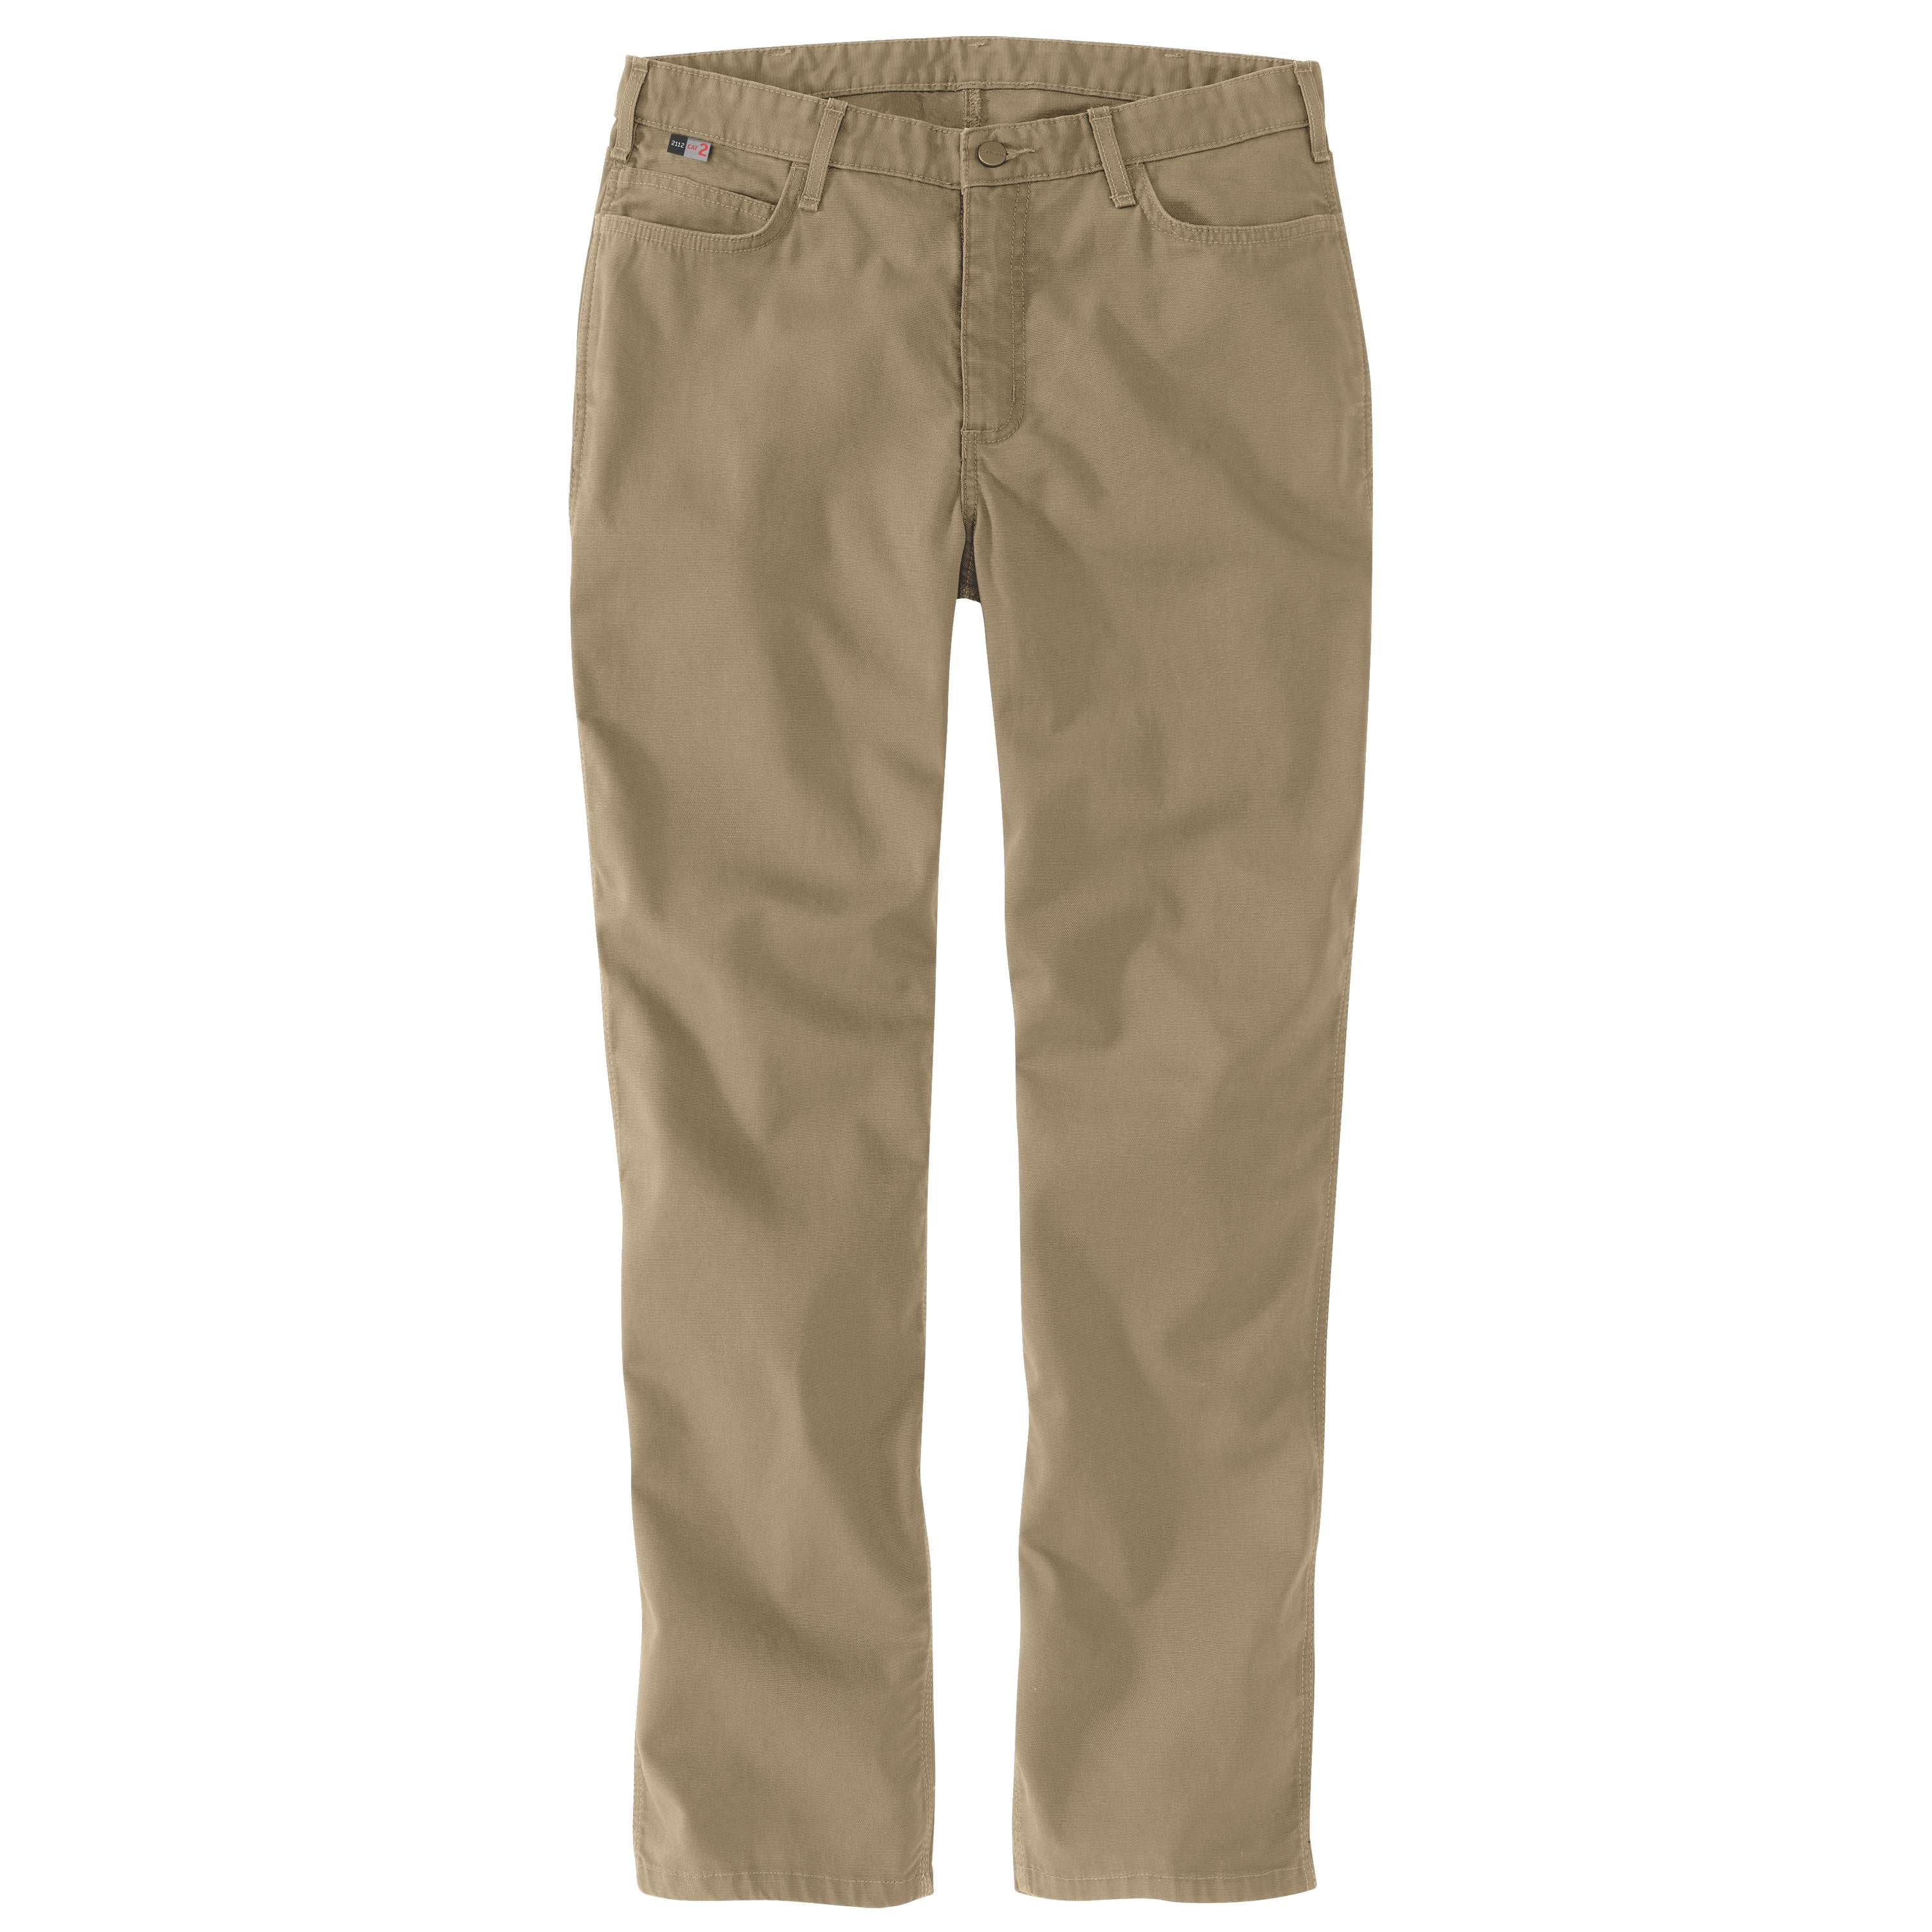 Women's Flame-Resistant Carhartt Force® Midweight Pocket Legging